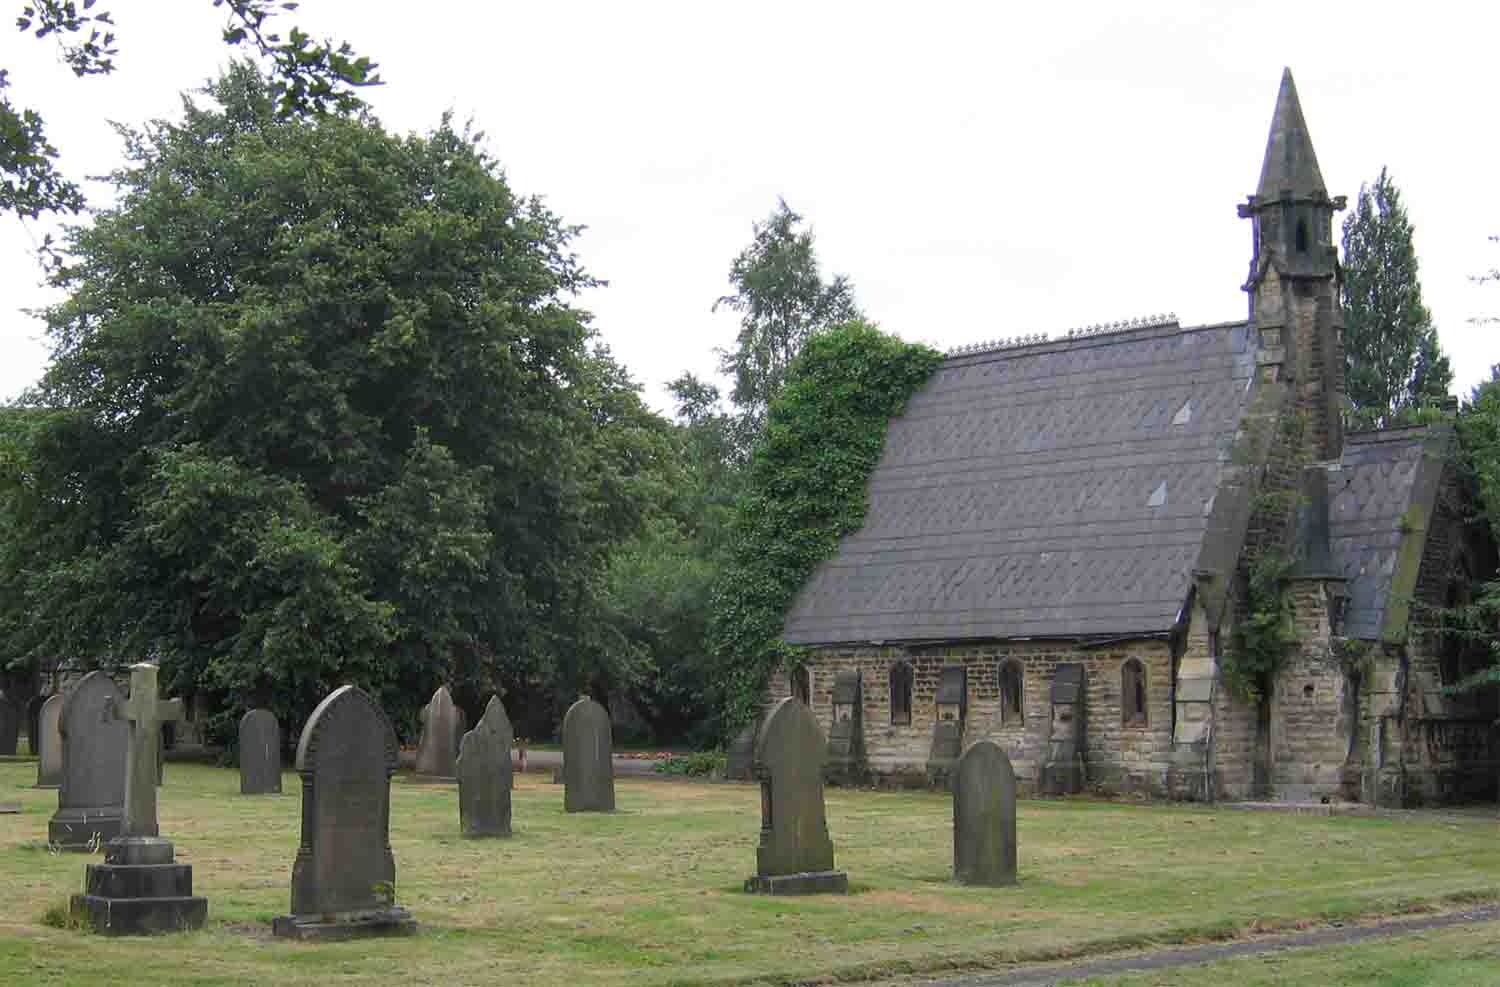 The disused Nonconformist mortuary chapel in Atherton Cemetery. Photo by Peter Wood July 2005